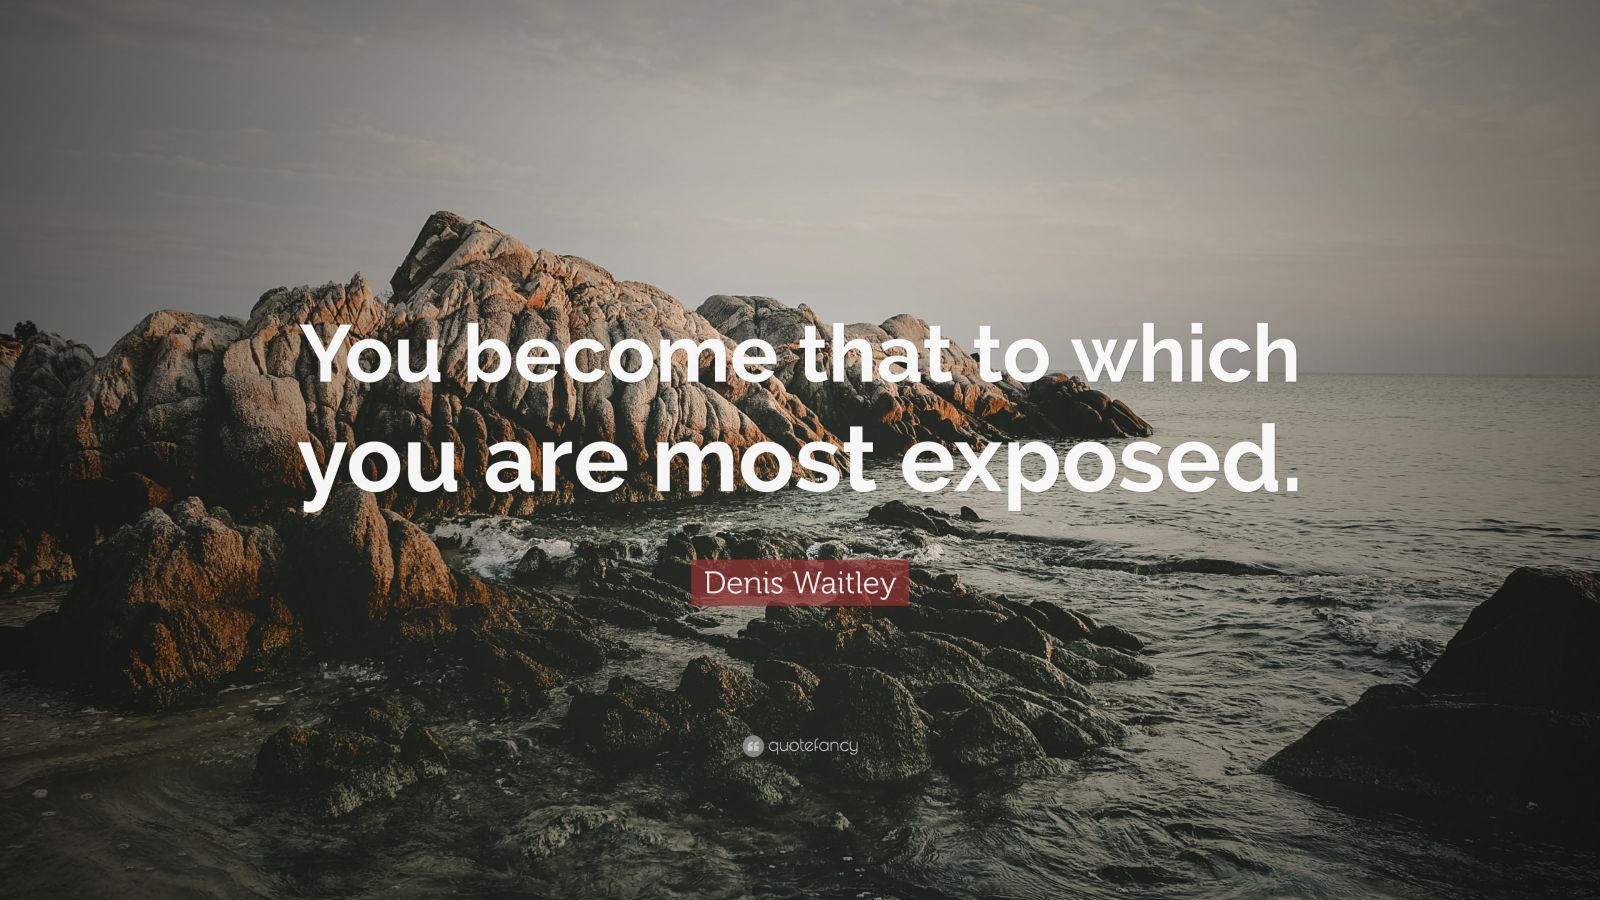 Denis Waitley Quote: “You become that to which you are most exposed.”